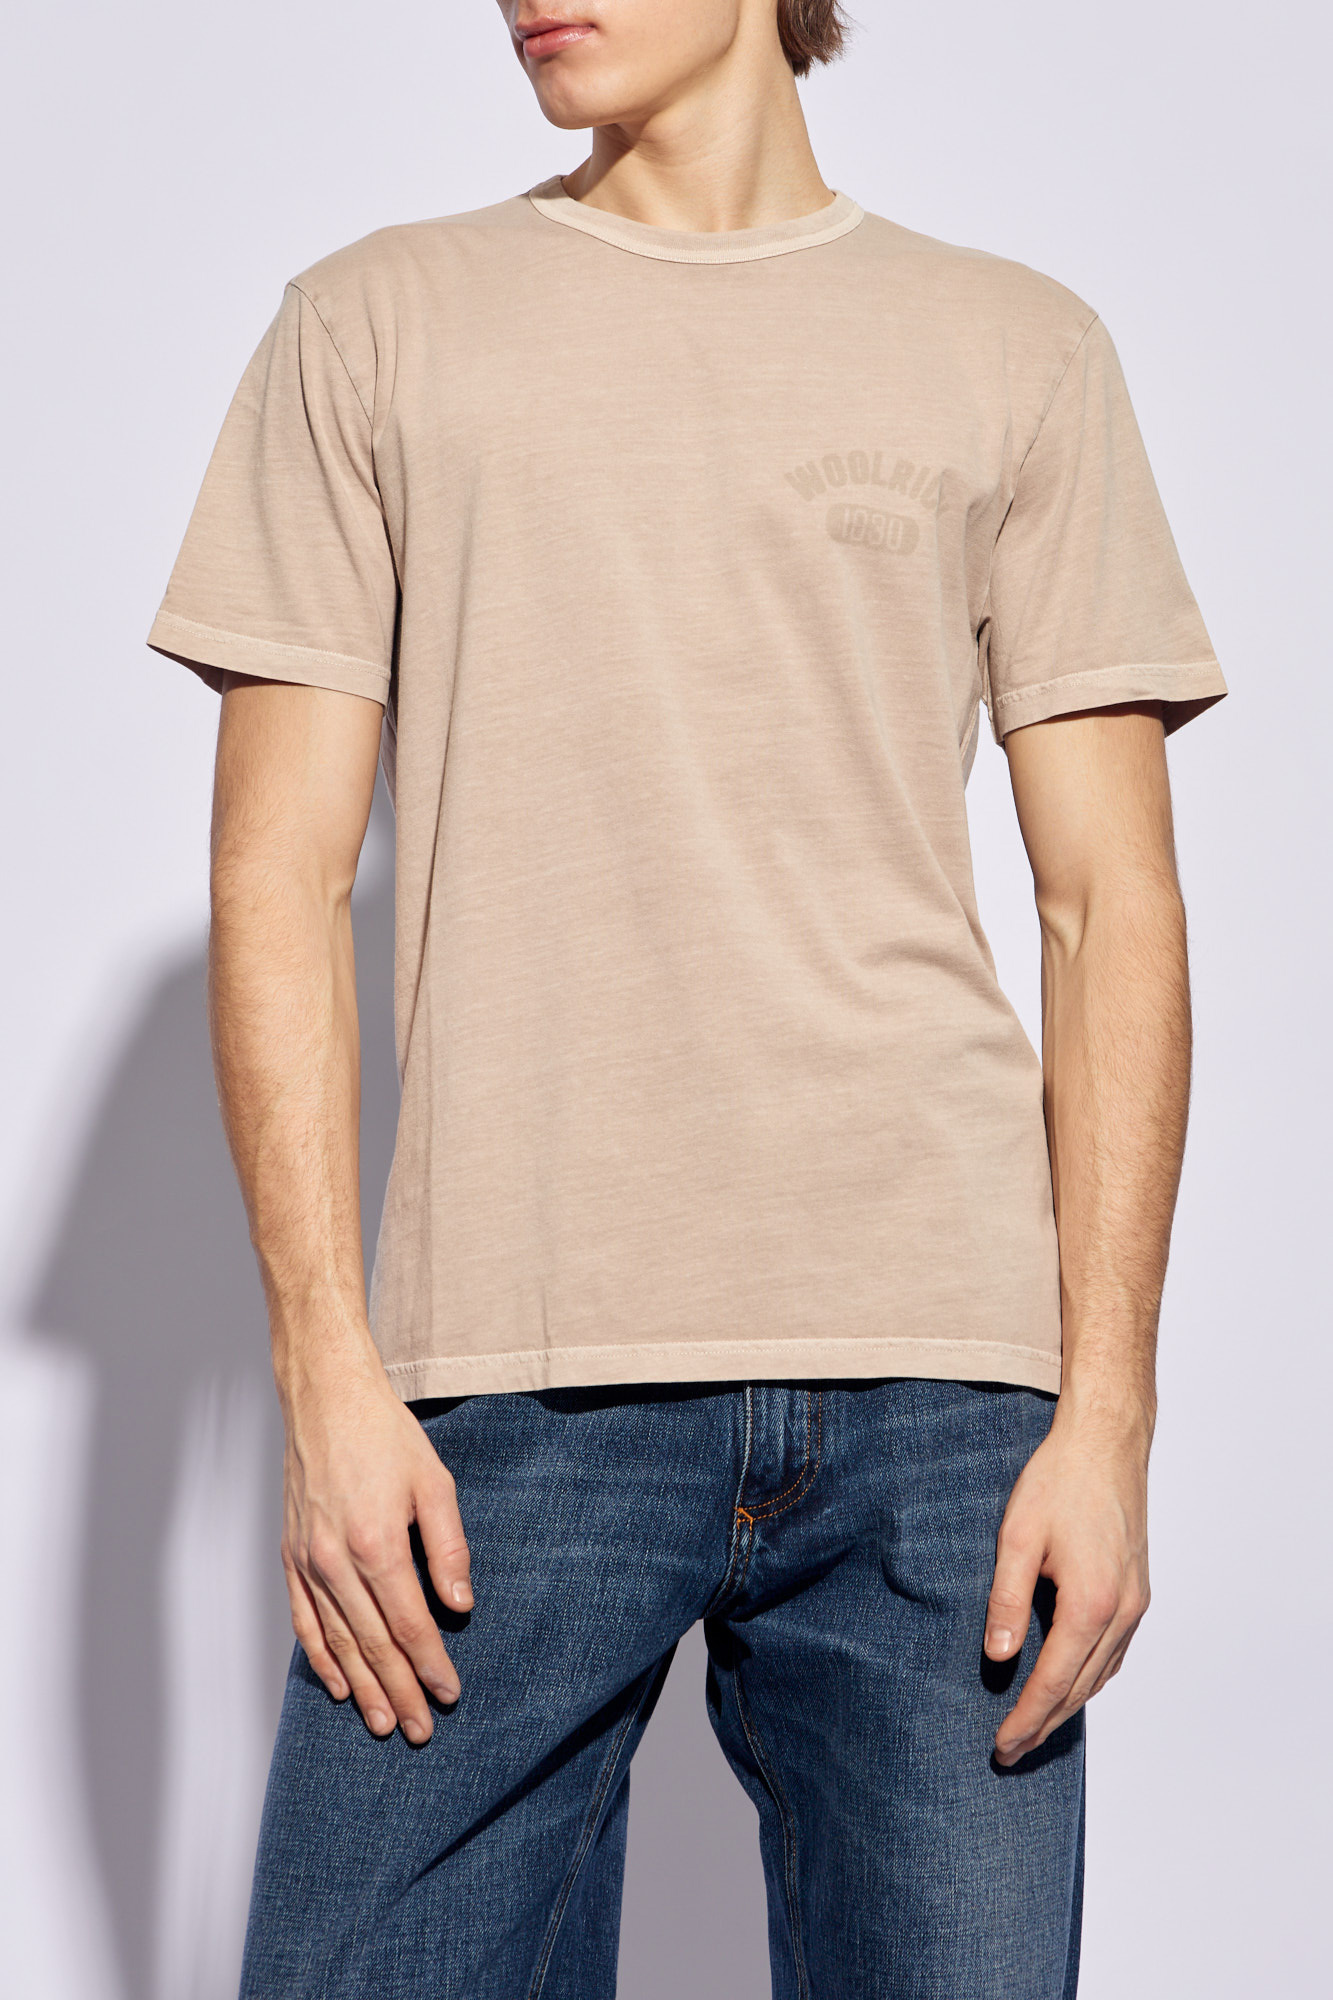 Woolrich T-shirt with logo